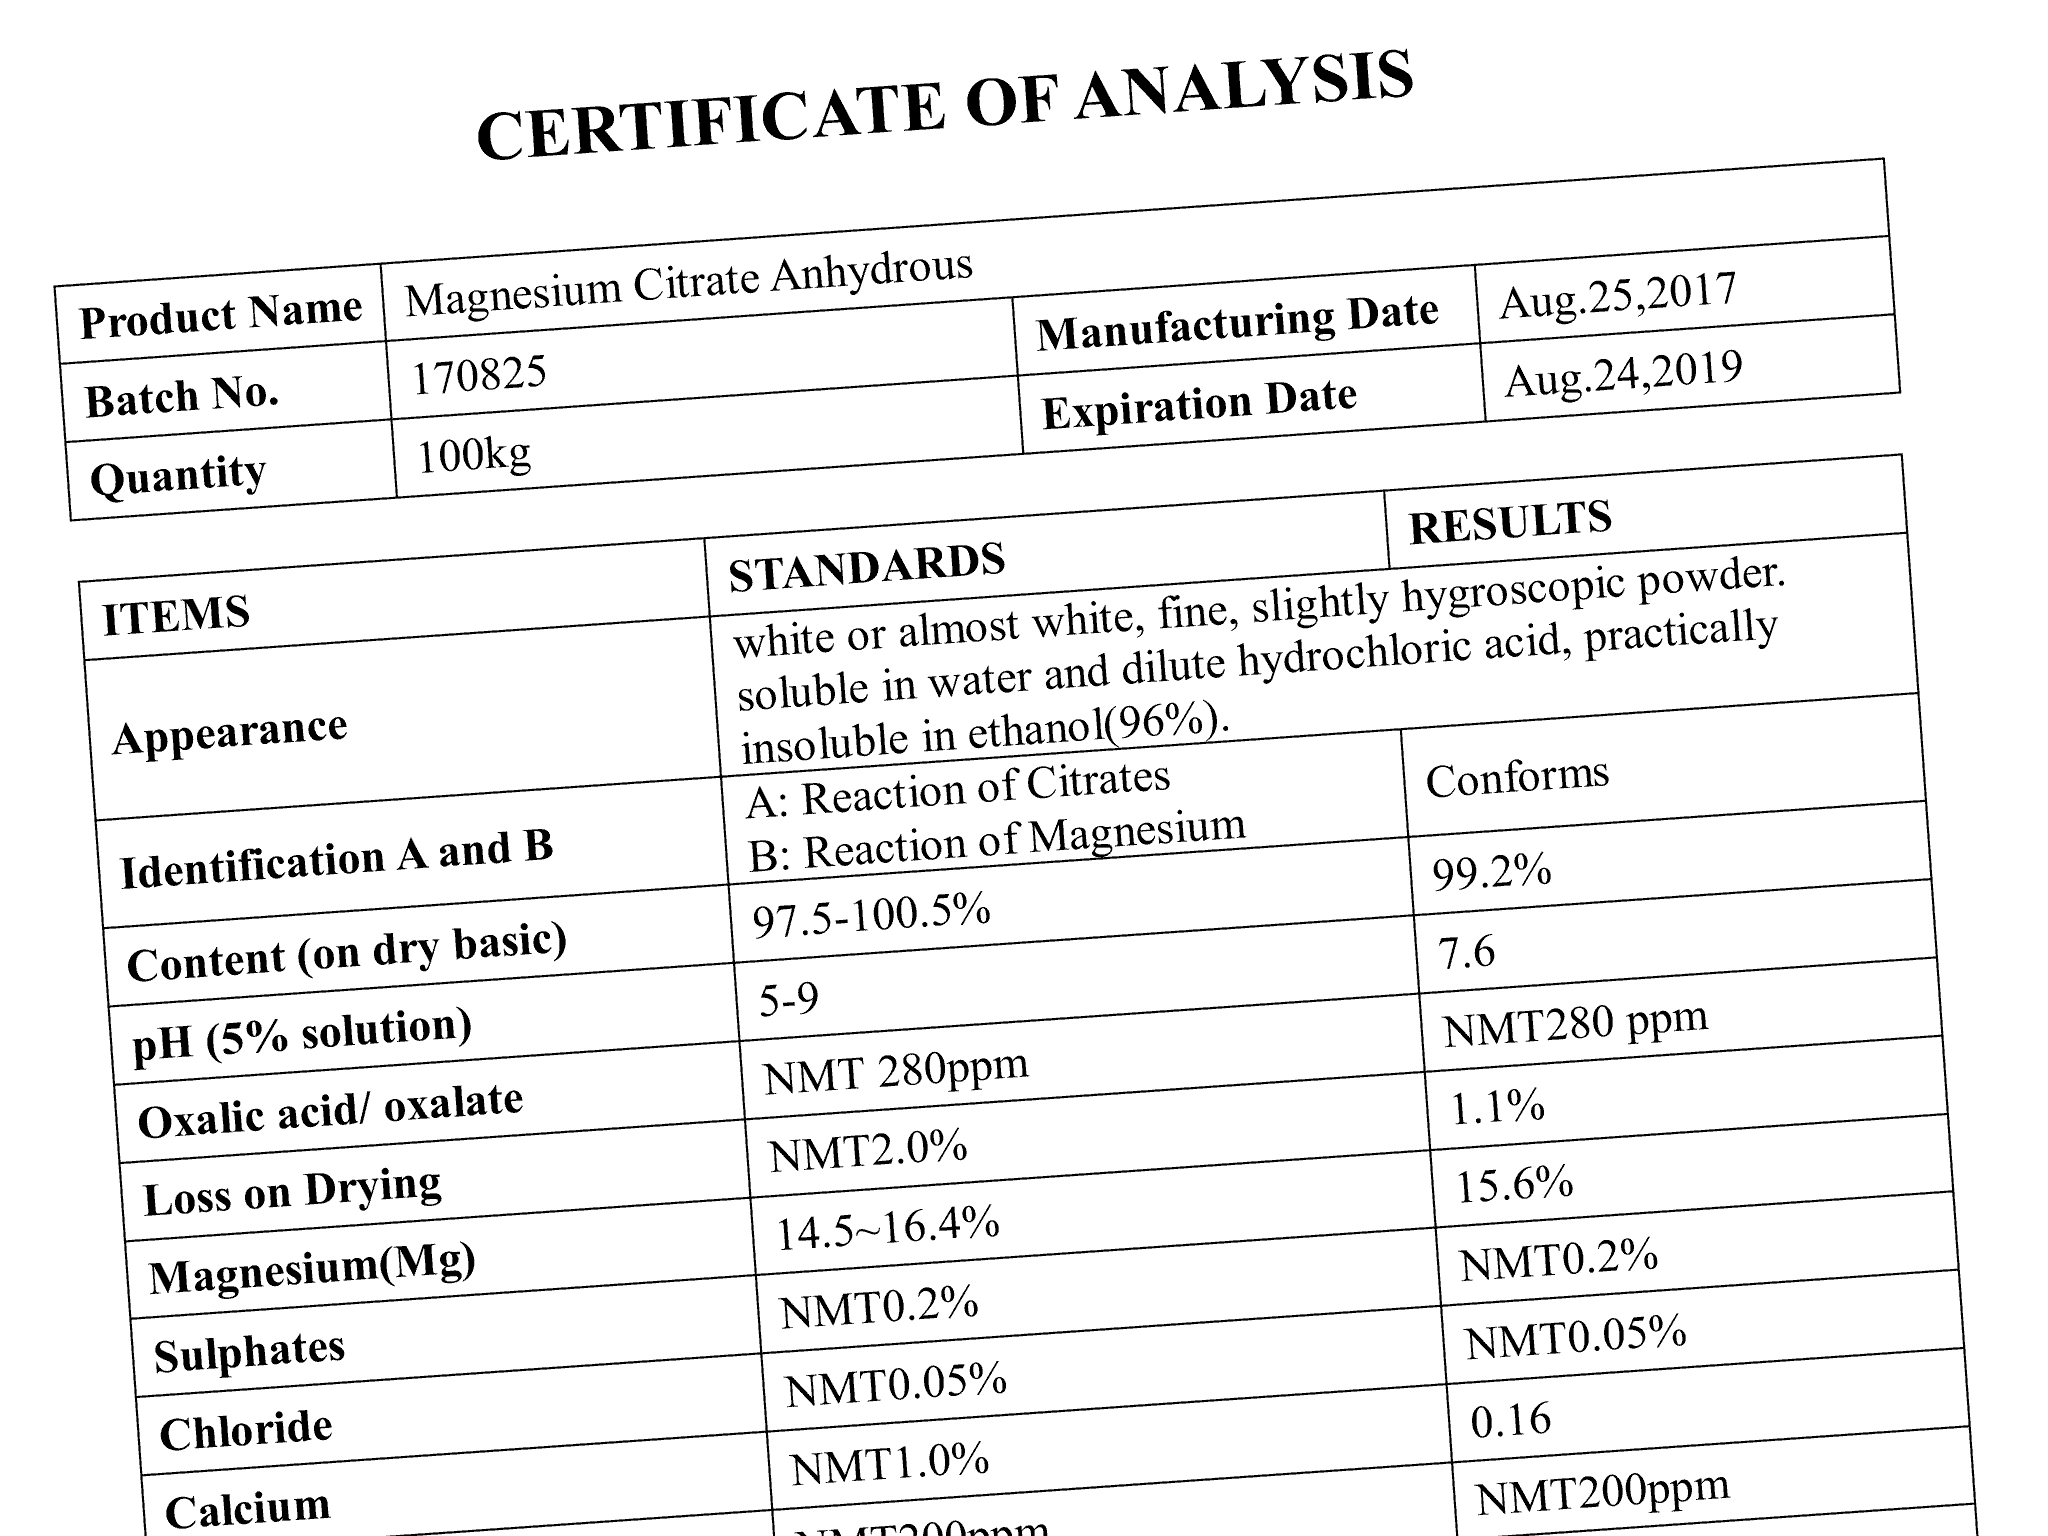 Example Certificate of Analysis - Next Valley